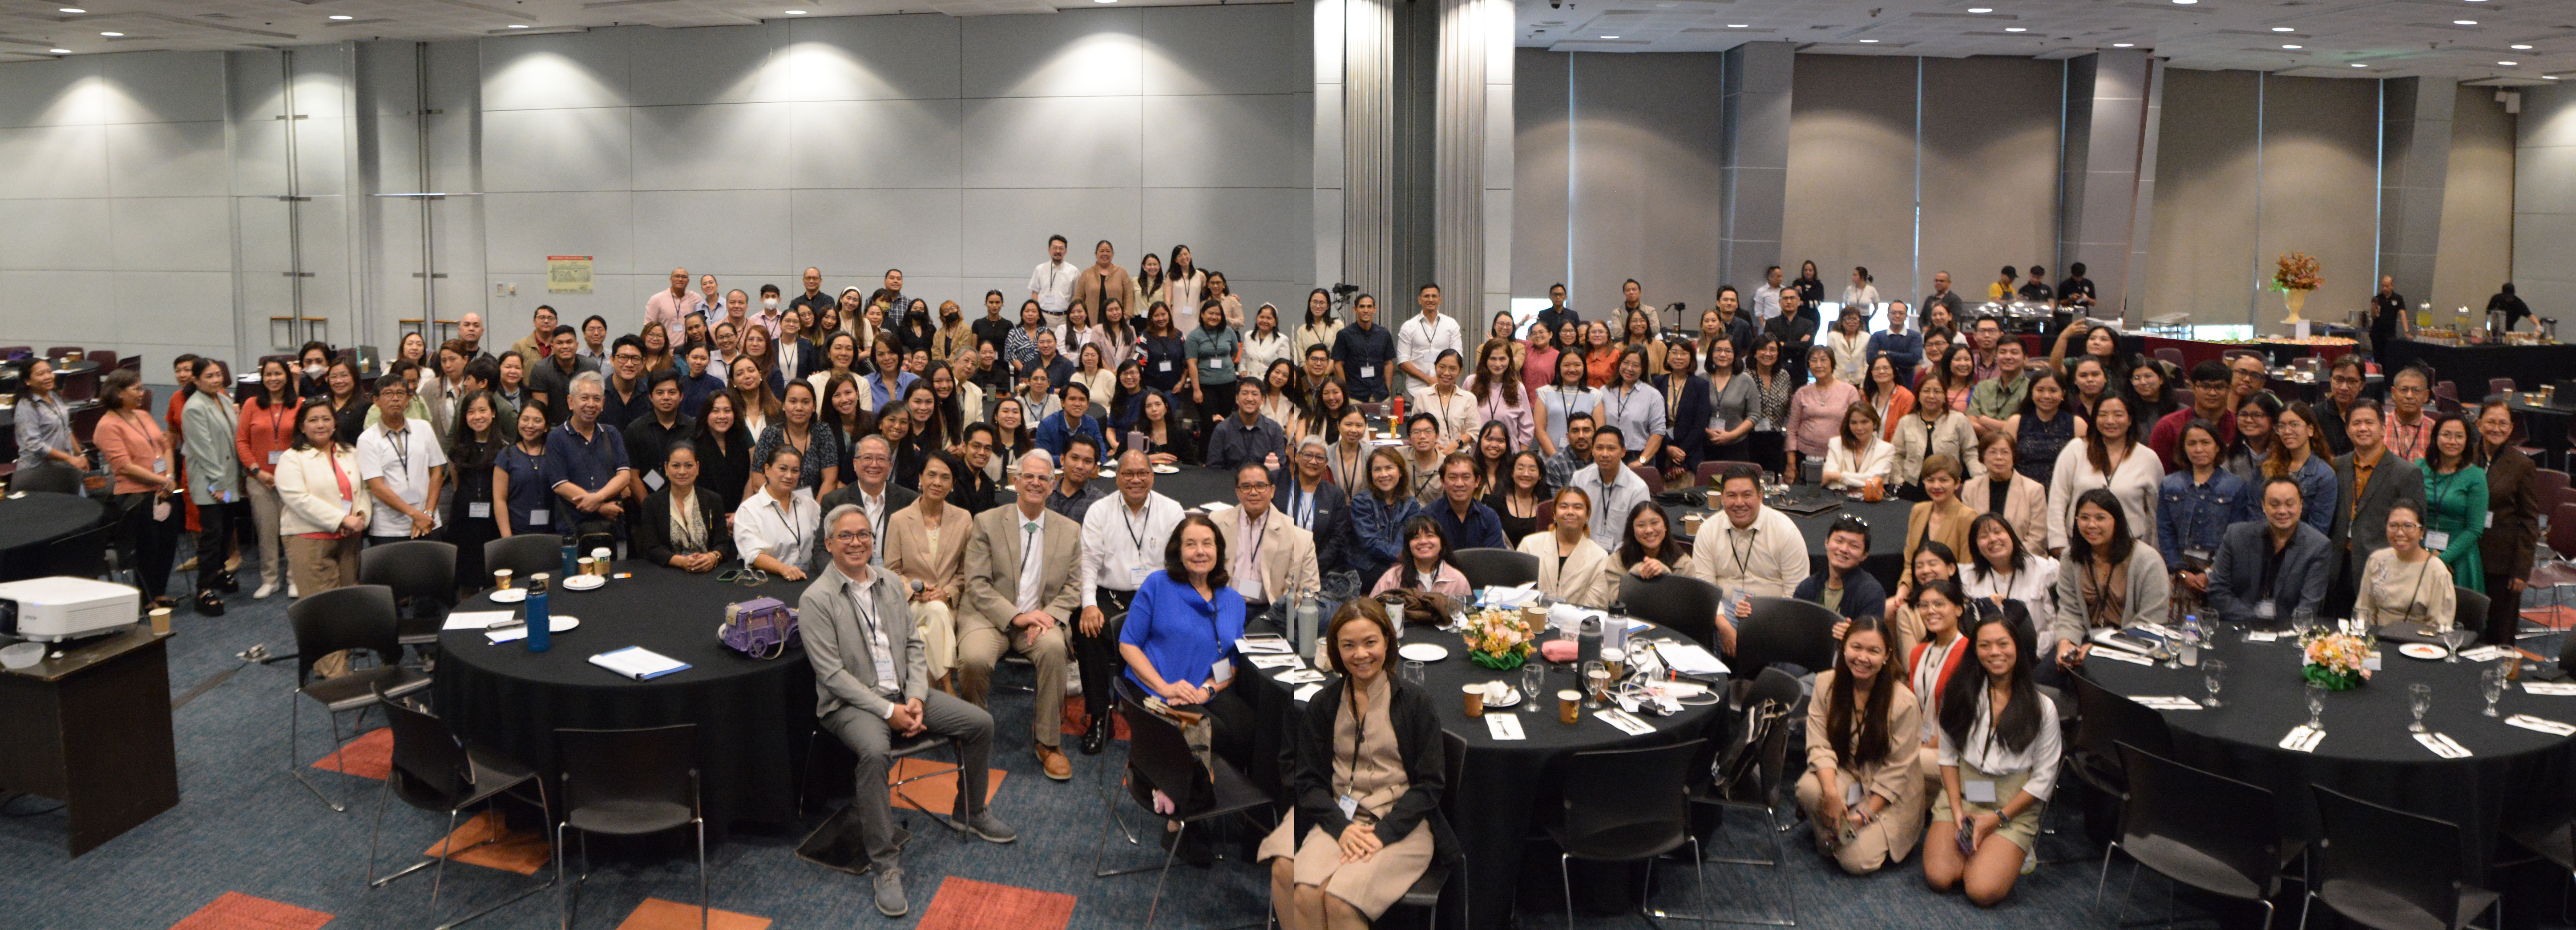 Featured image for Ateneo School of Medicine and Public Health Hosts Inaugural Asian Functional Medicine Conference